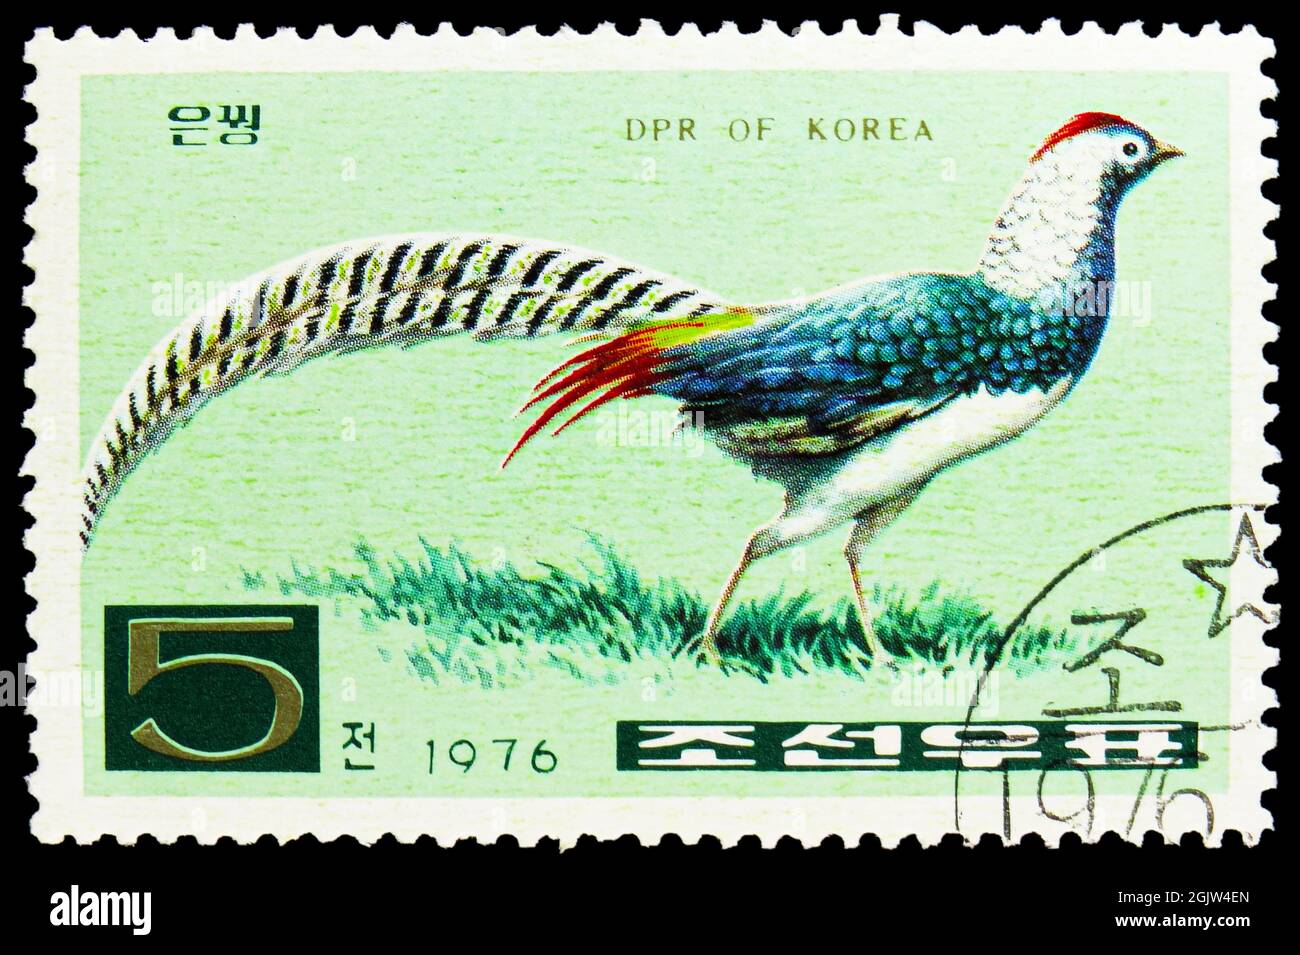 MOSCOW, RUSSIA - JUNE 20, 2021: Postage stamp printed in Korea shows Lady Amhersts Pheasant (Chrysolophus amherstiae), Pheasants serie, circa 1976 Stock Photo